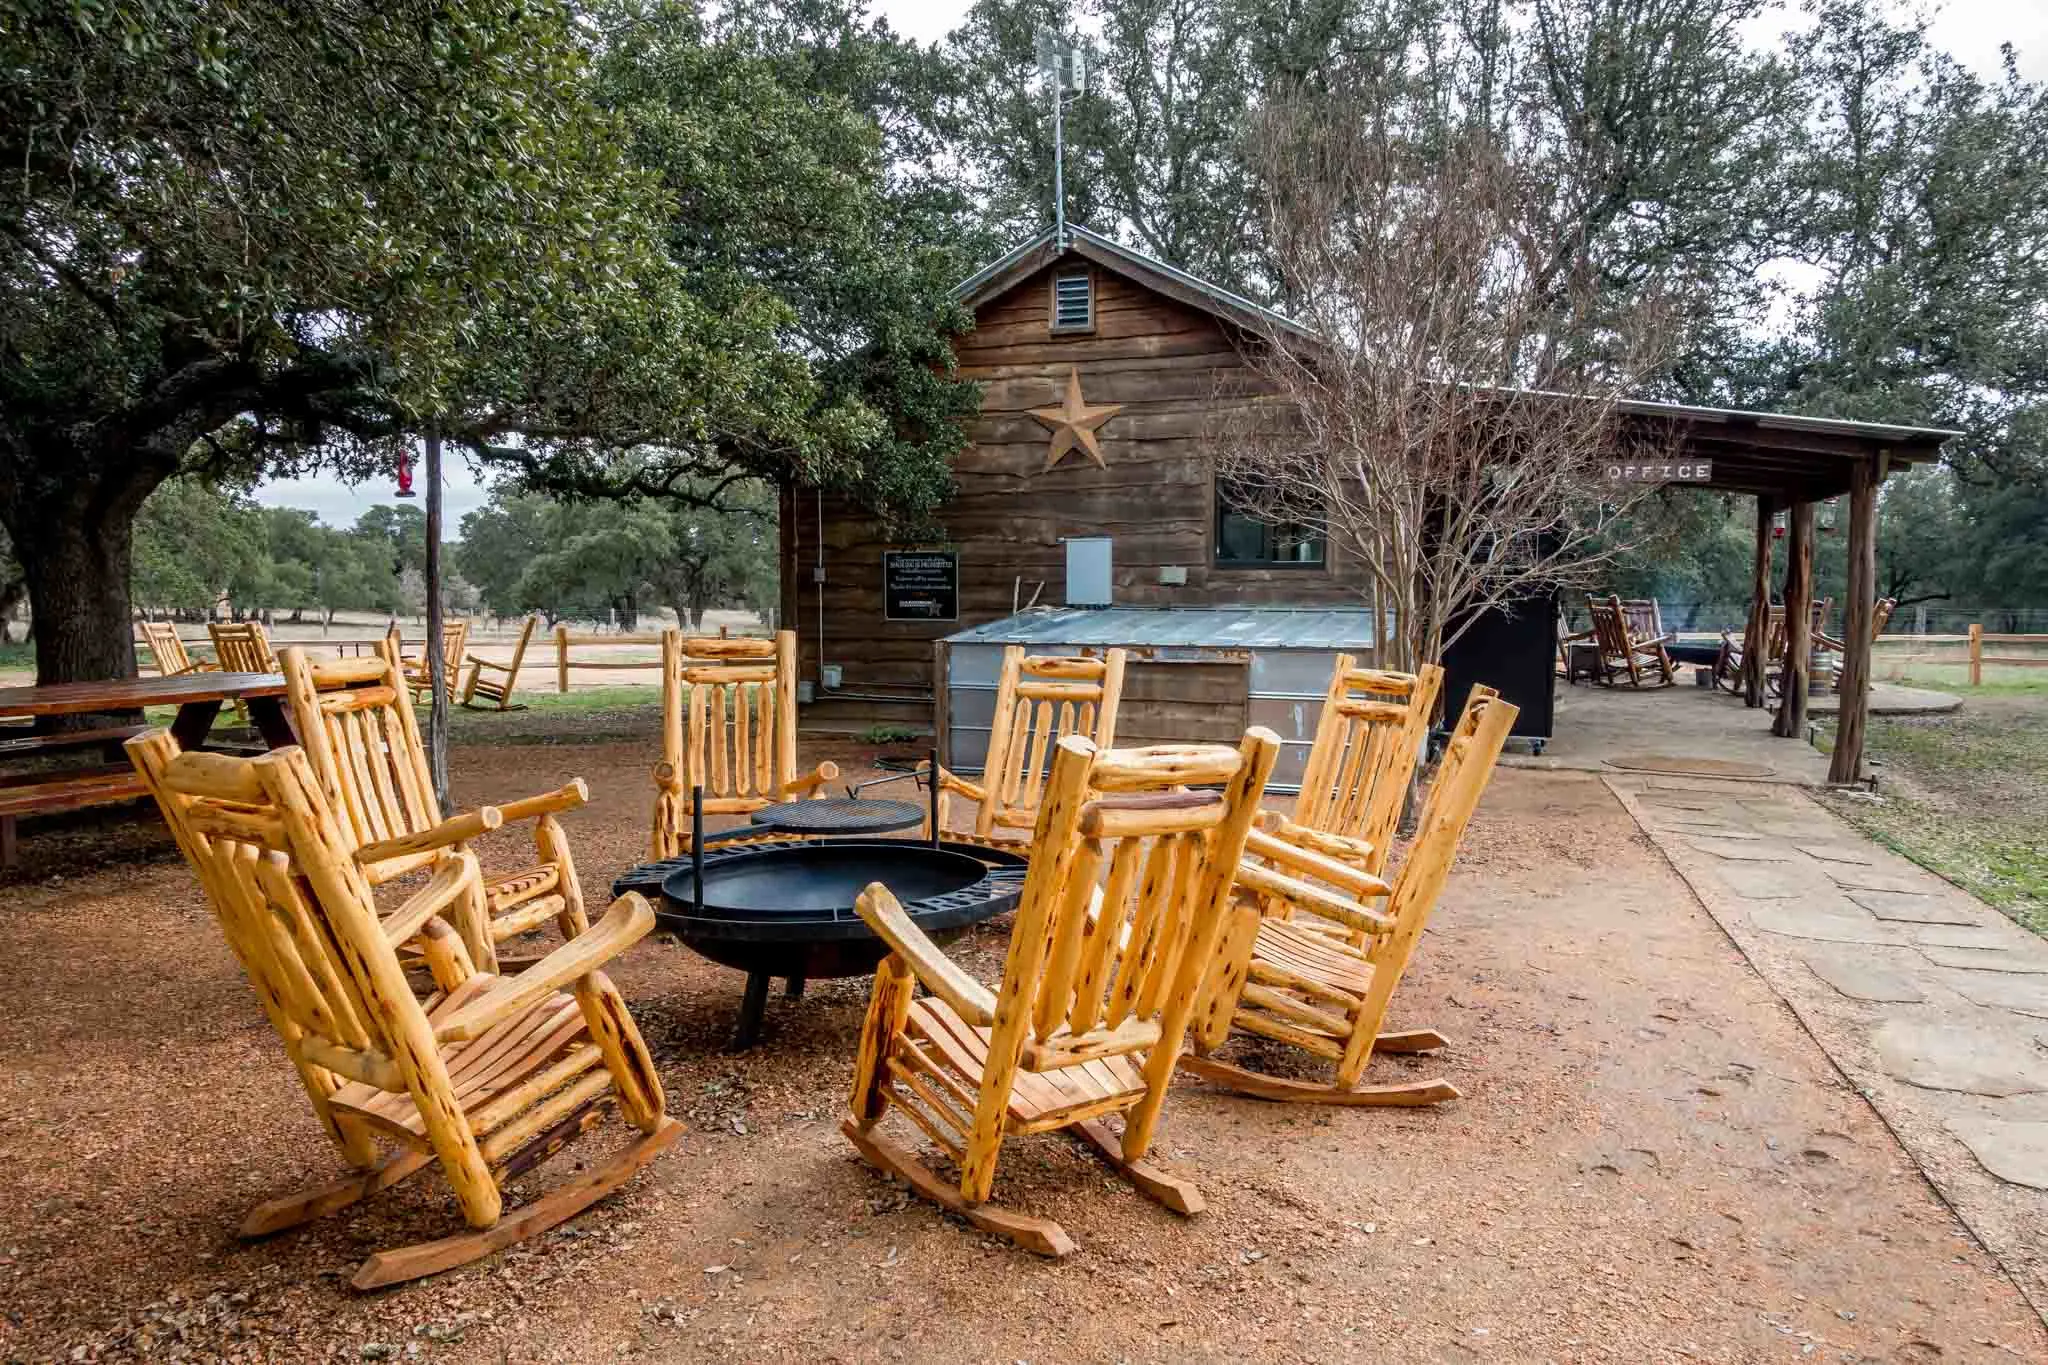 Rocking chairs outside a wooden cabin